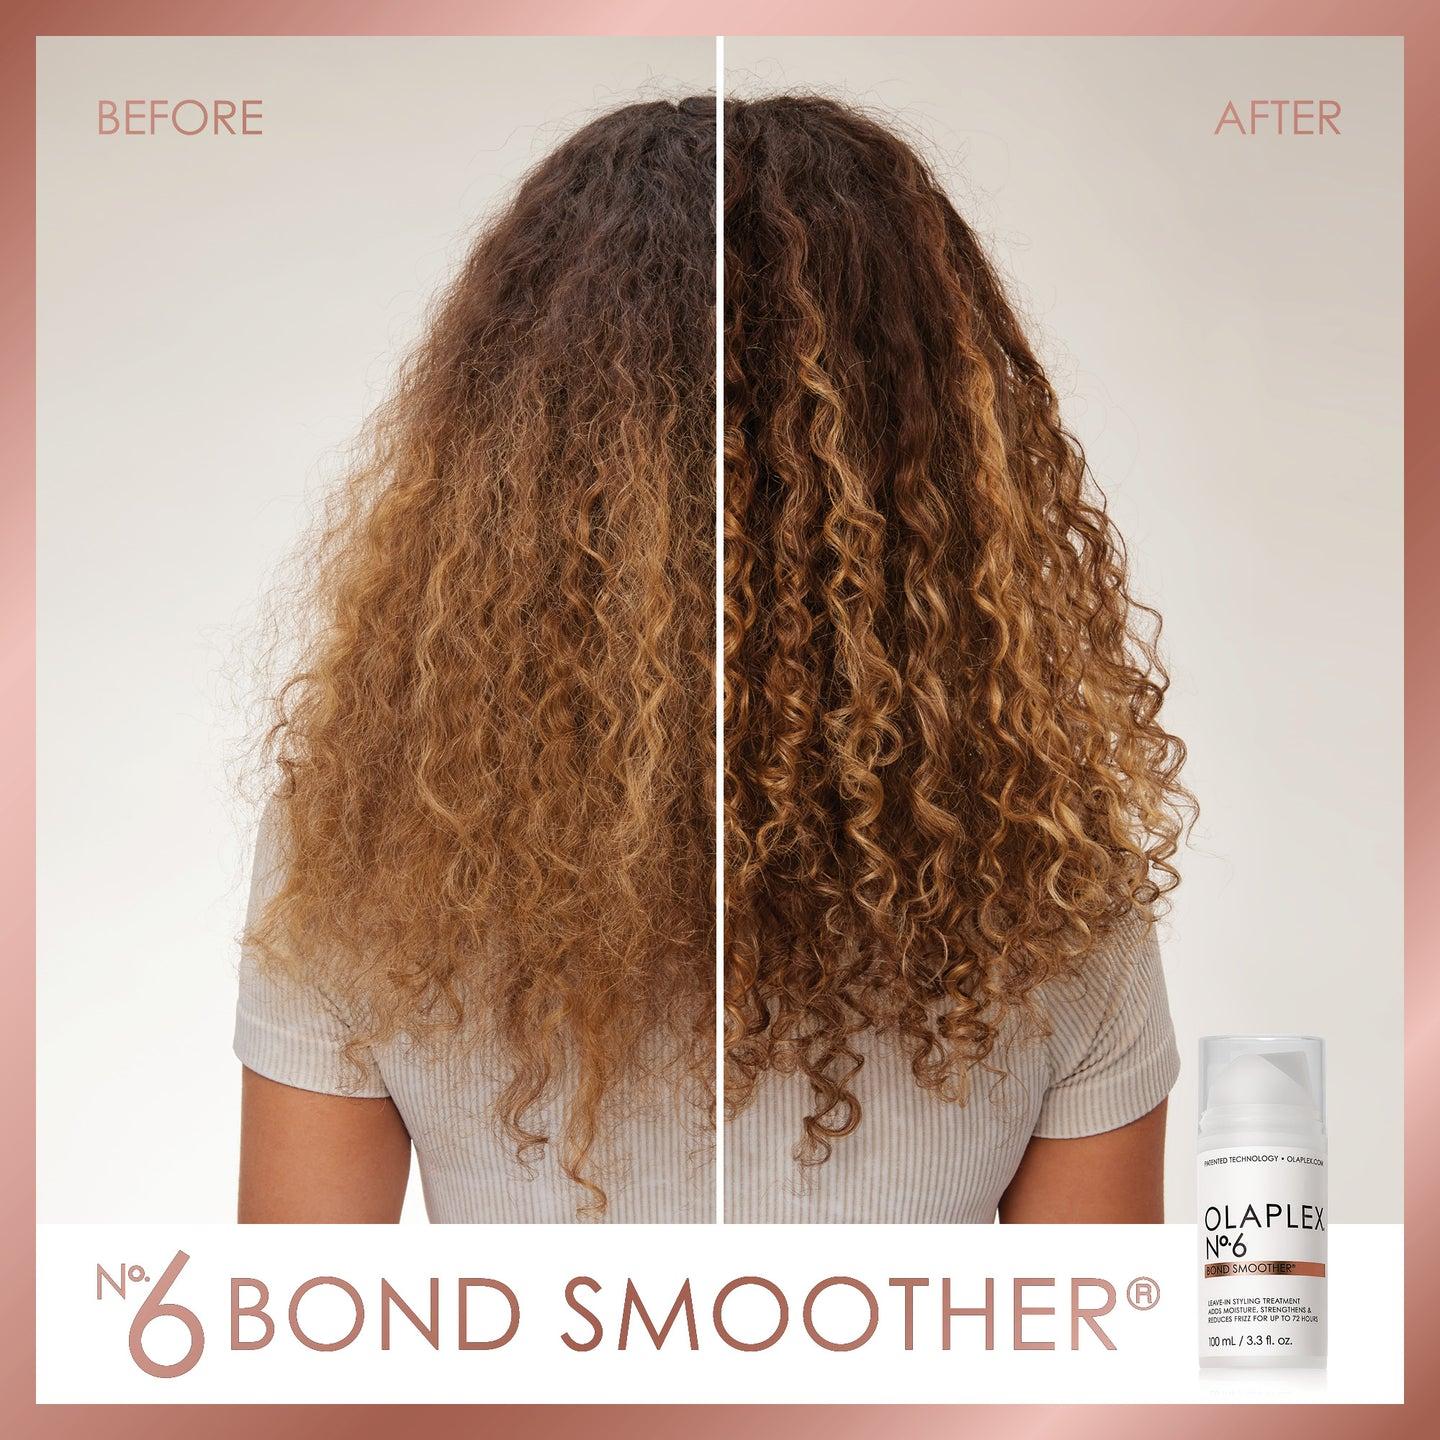 Olaplex No 6 Bond Smoother - buy at Counter Culture Store